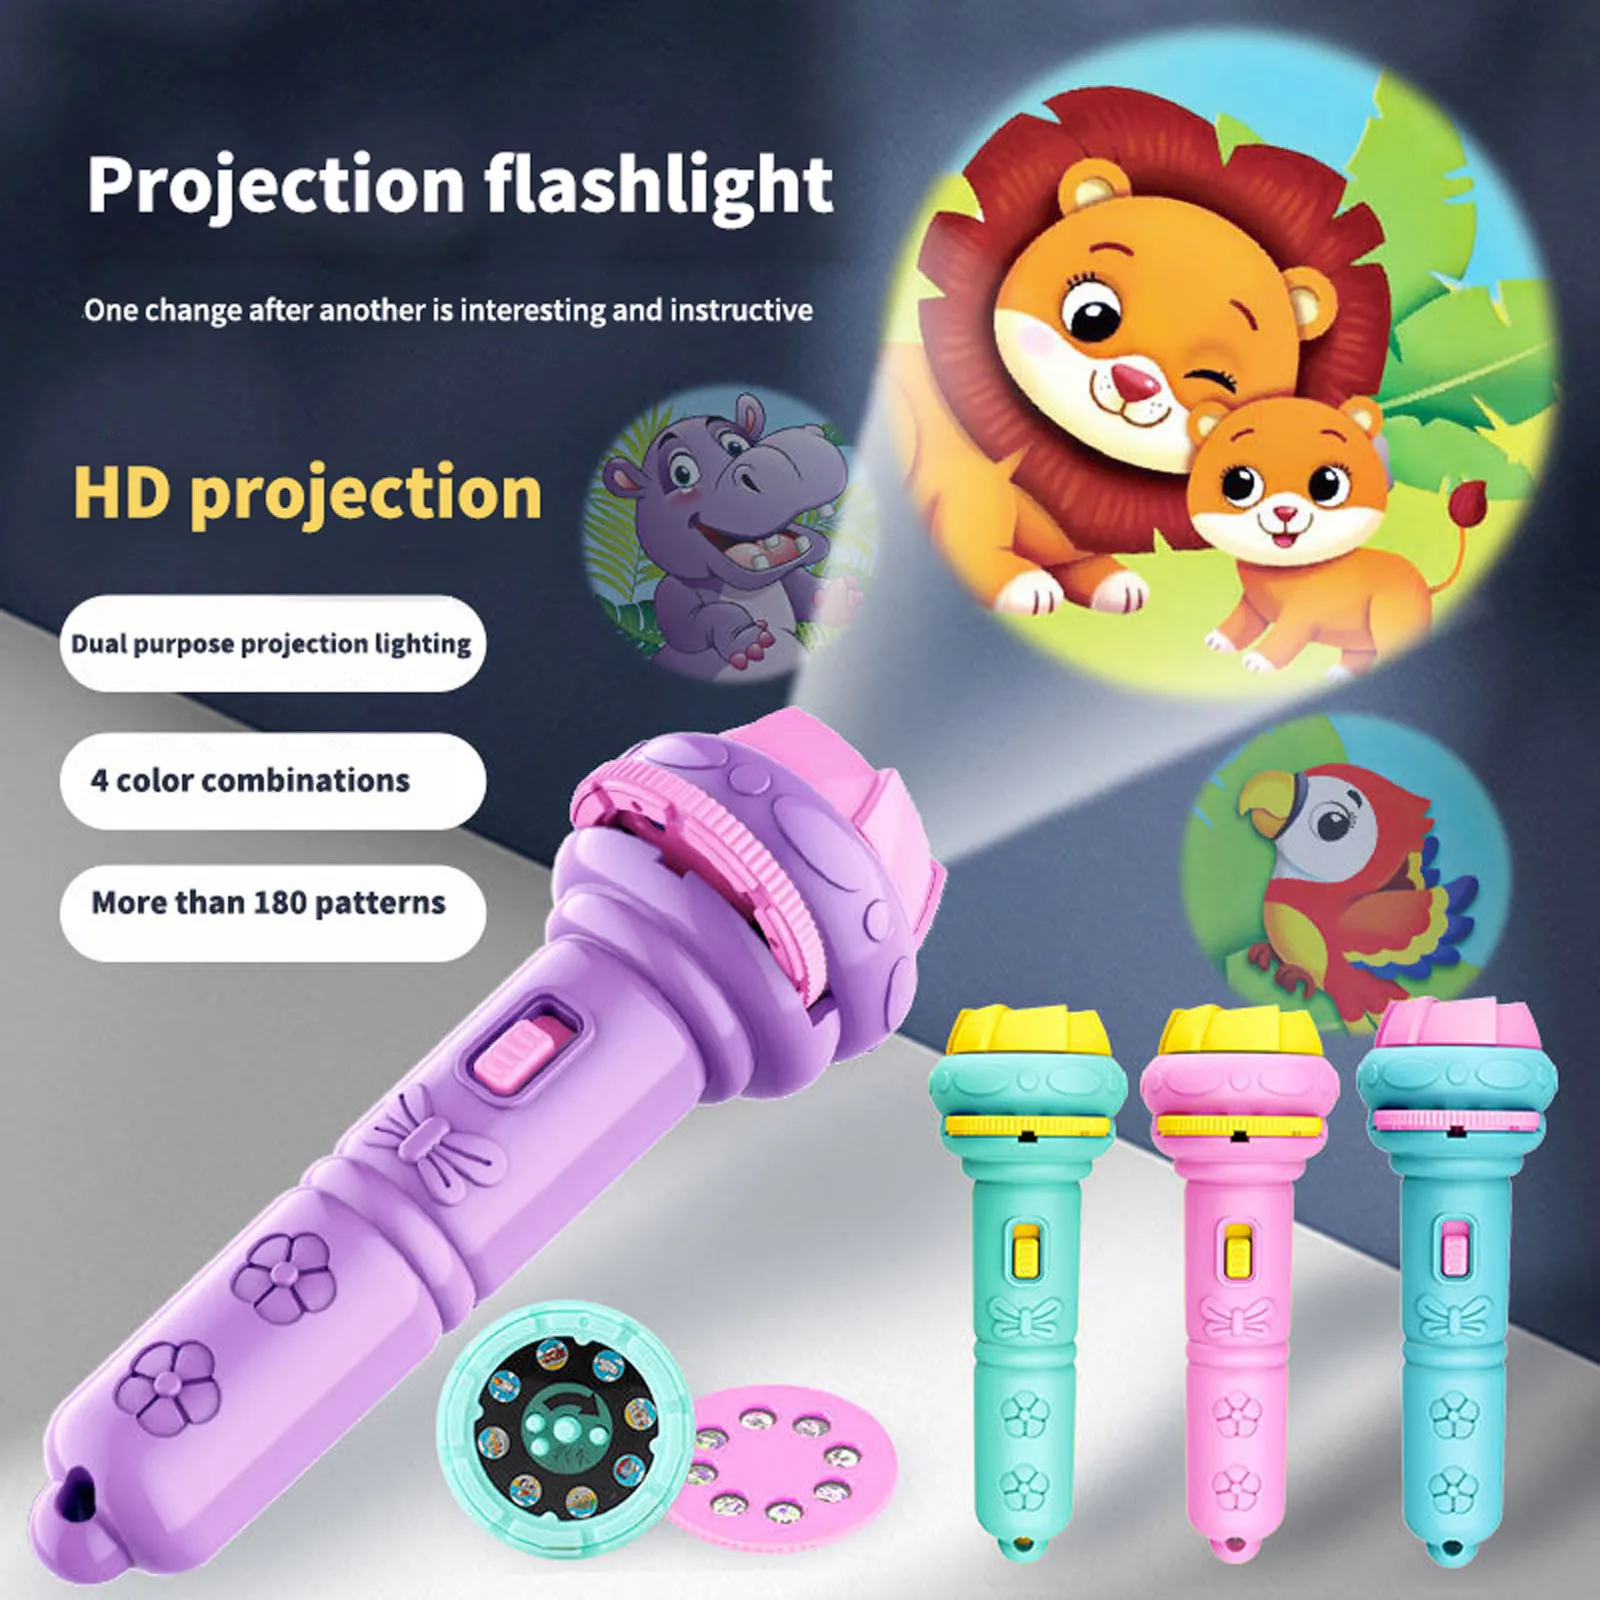 

Flashlight Projector Torch Lamp Toy Cute Cartoon Creativity Toy Torch Lamp Flashlight Projector Toy Baby Sleeping Story Book